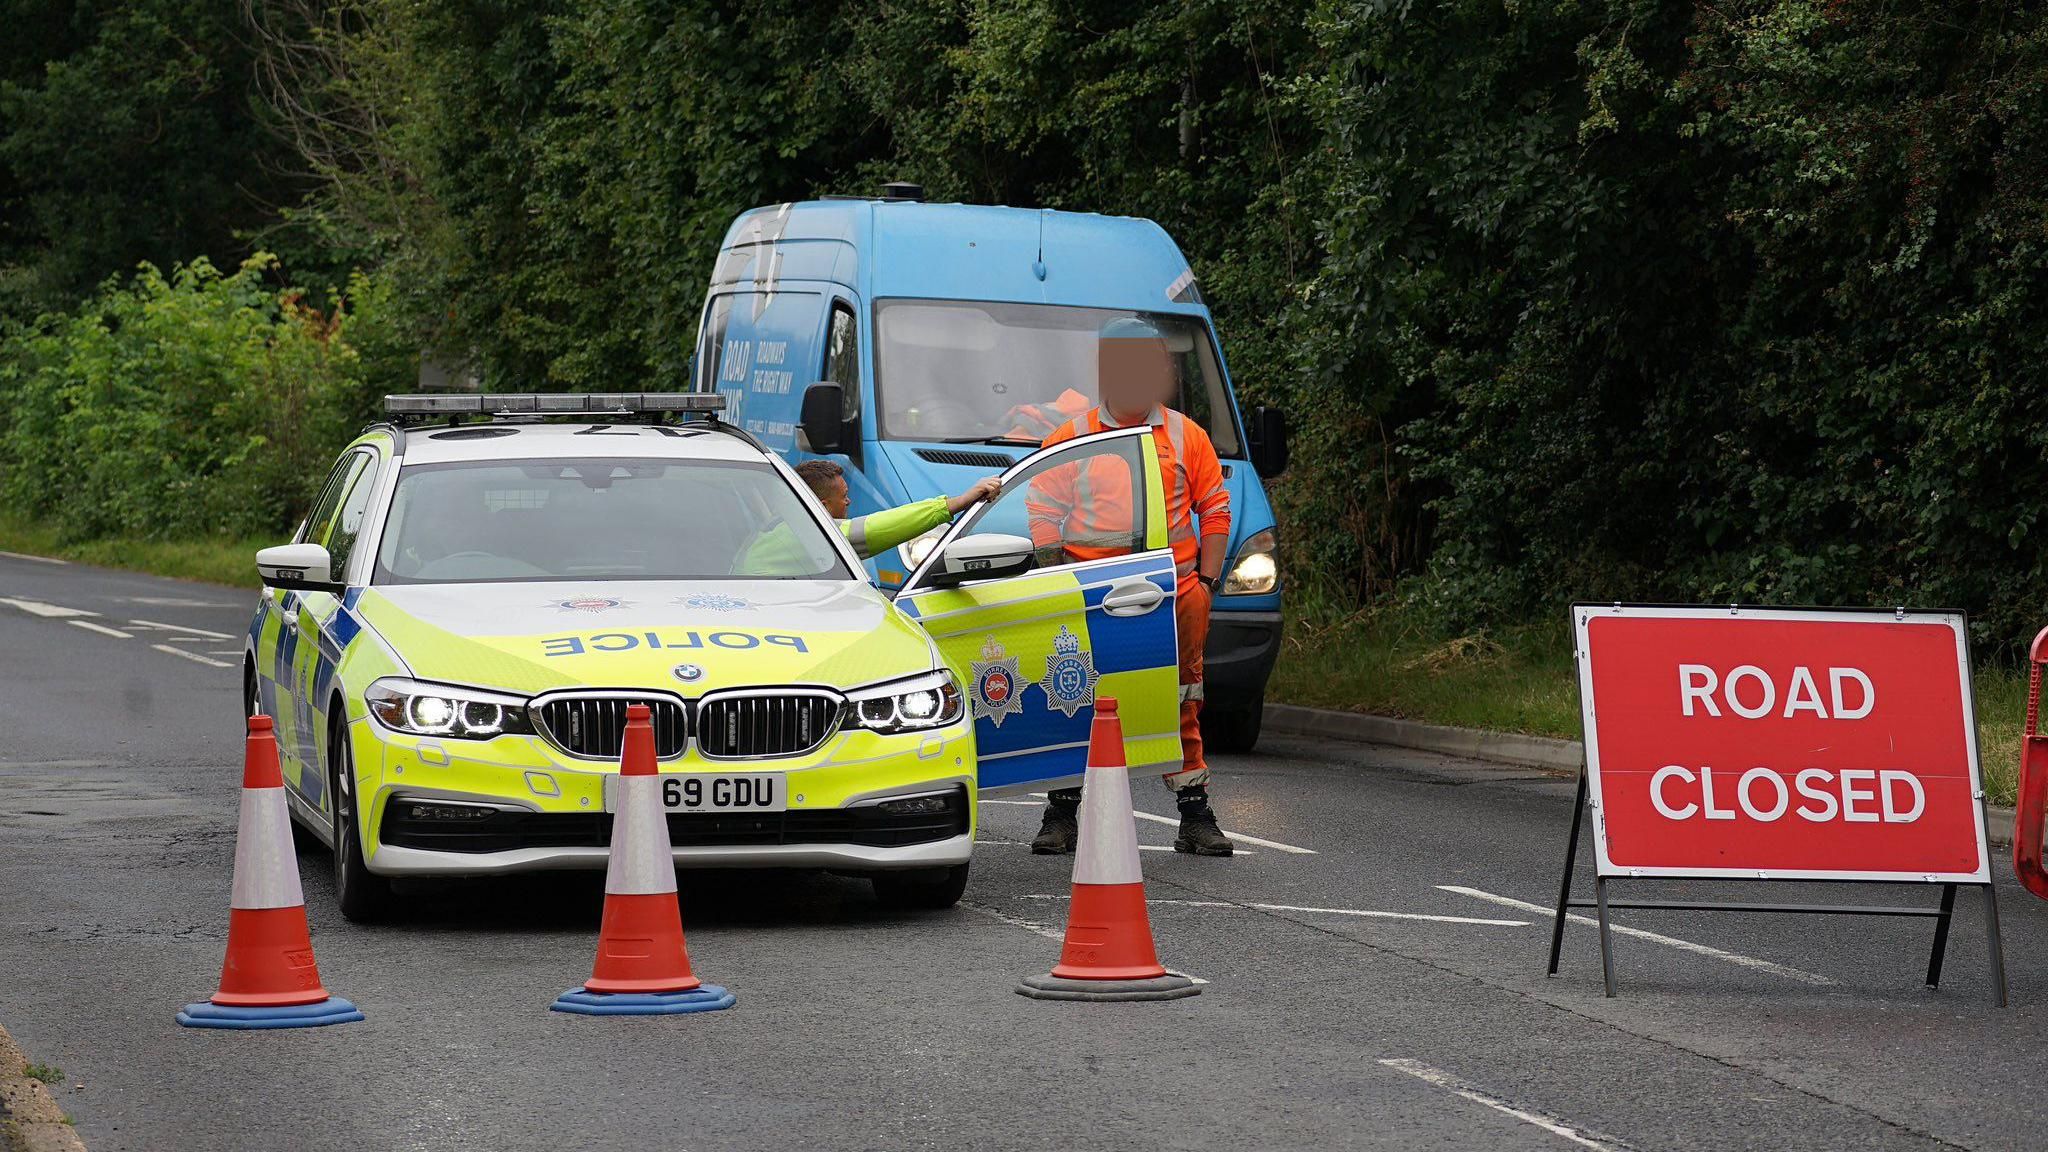 A police car behind three orange traffic cones next to a red sign which reads Road Closed. A man in an orange high-vis outfit is stood in front of a blue van